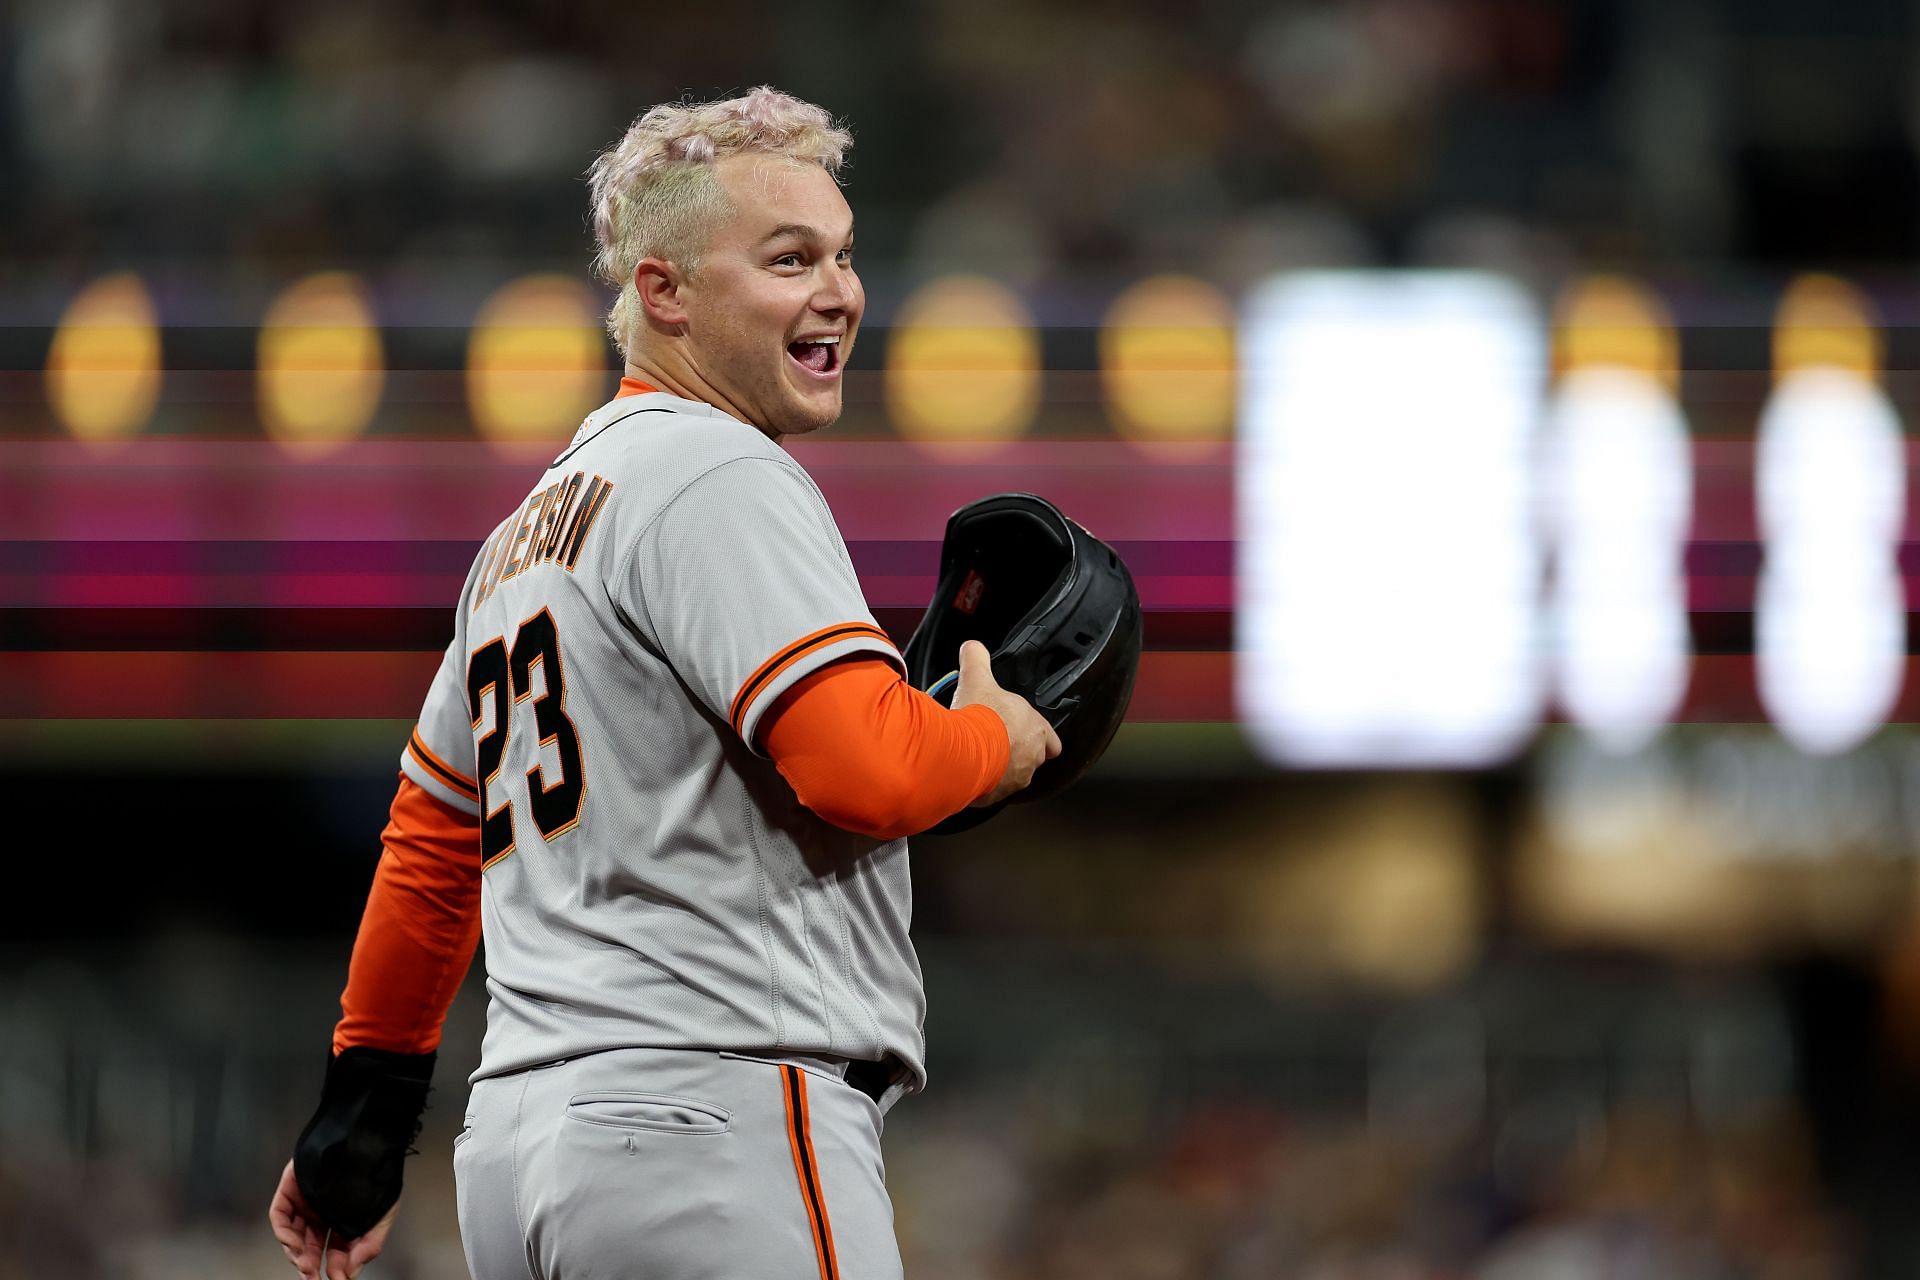 Joc Pederson returns to Giants eager to get back to playoffs